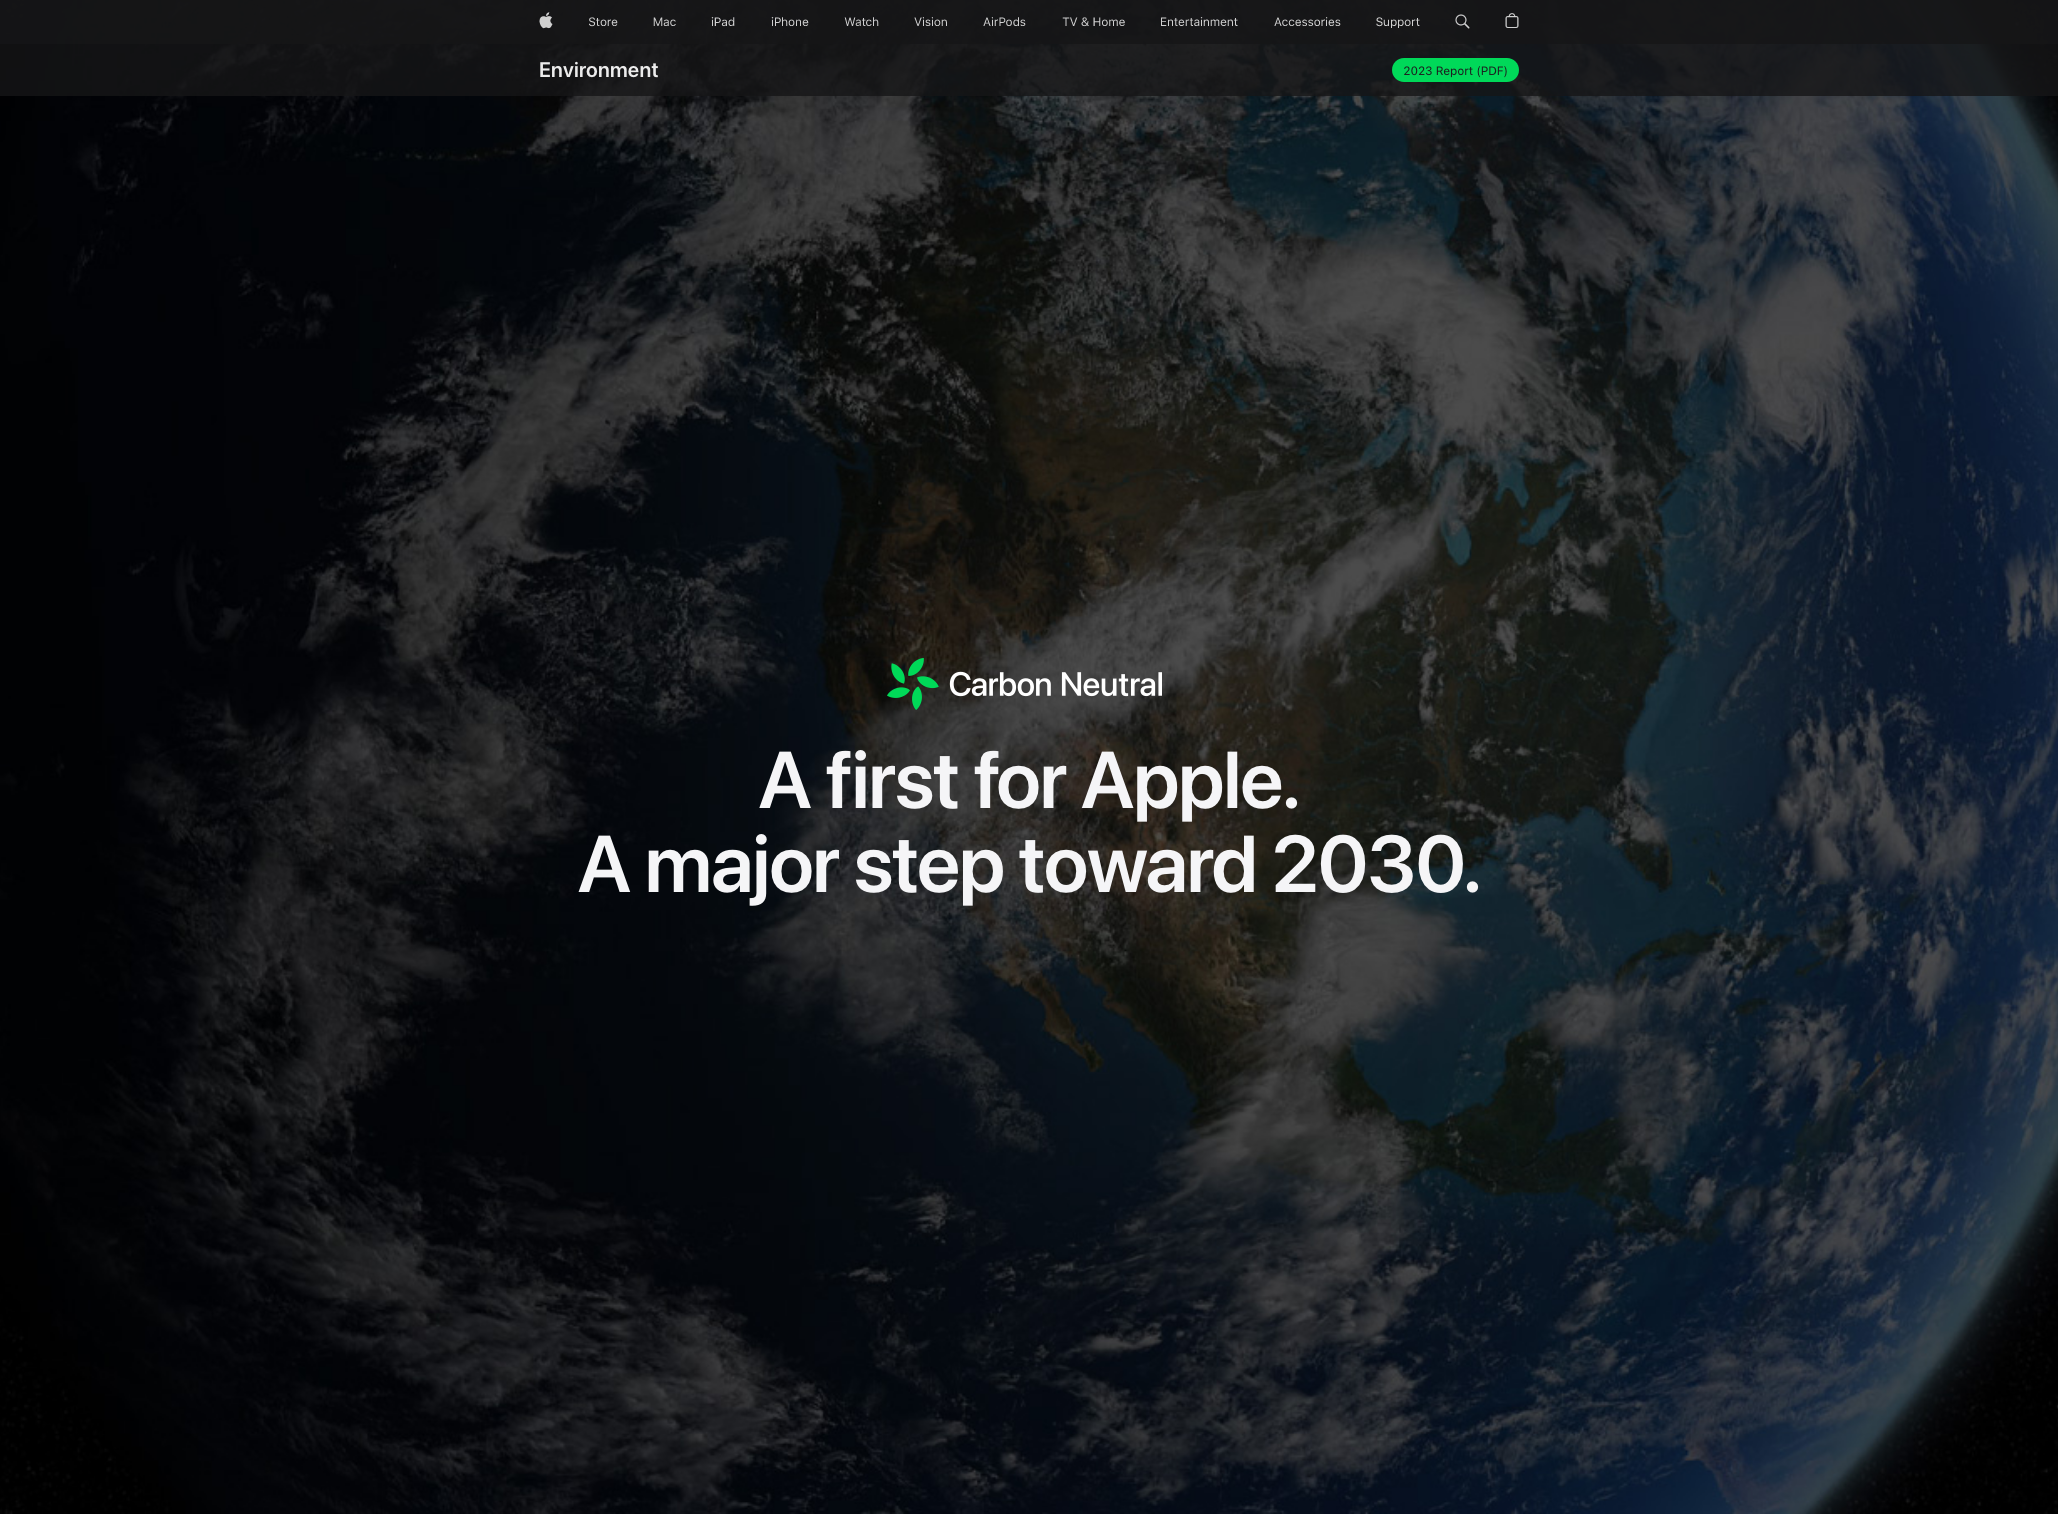 Apple's introduced a "Carbon Neutral" stamp for their products